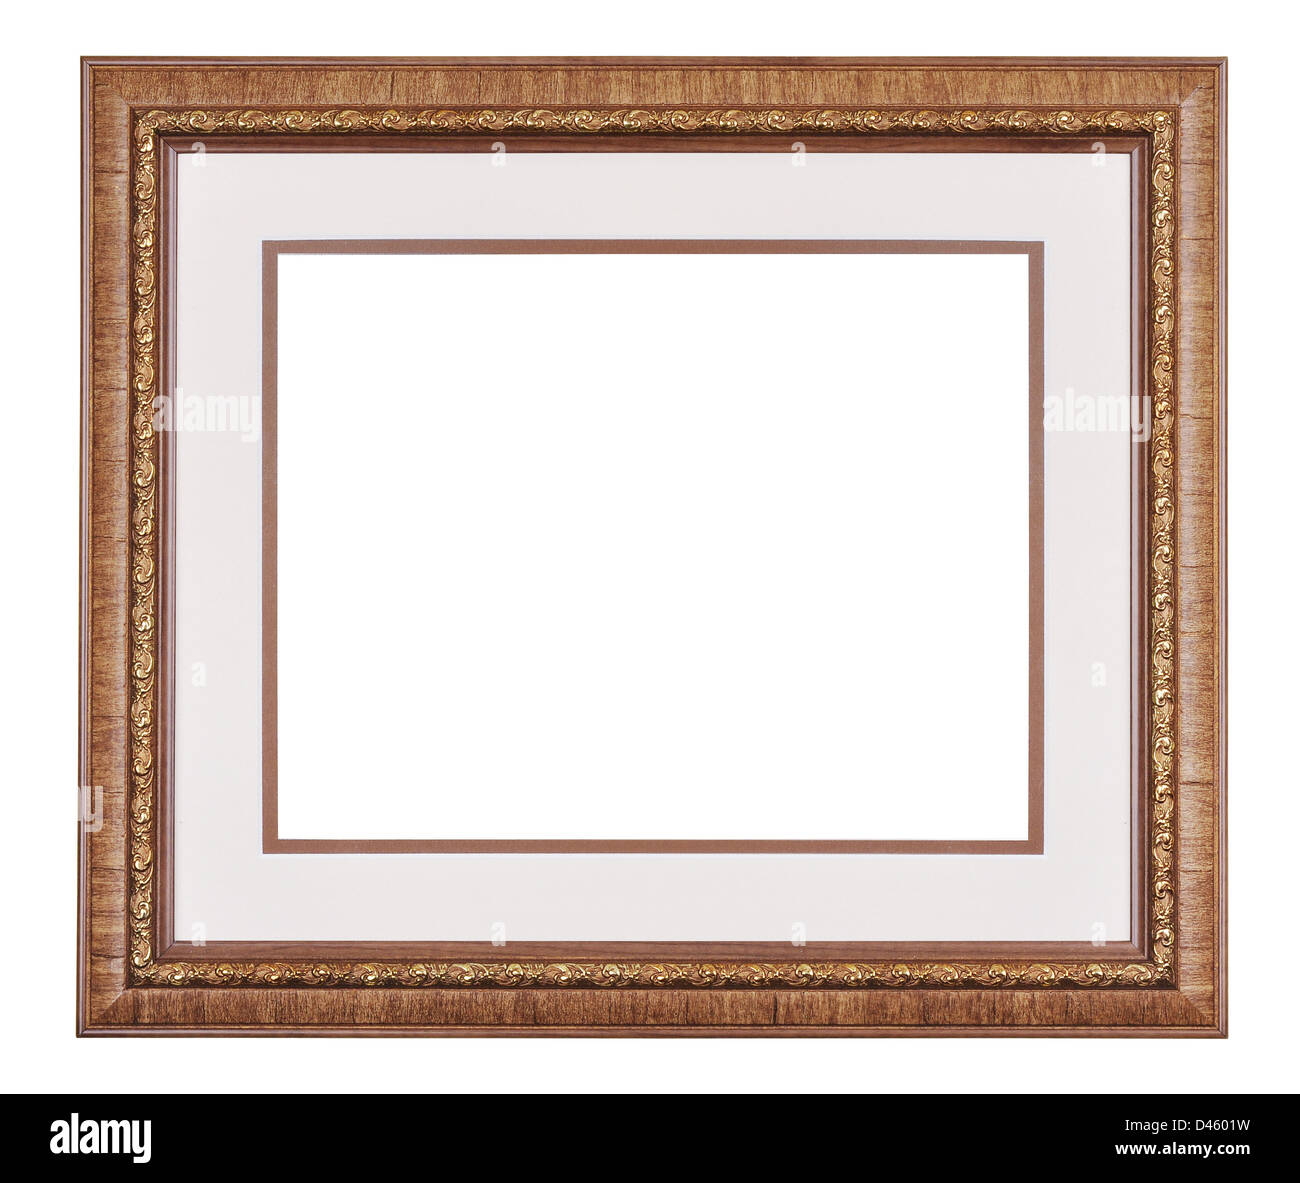 Wooden frame with passe-partout for paintings or photographs. Stock Photo